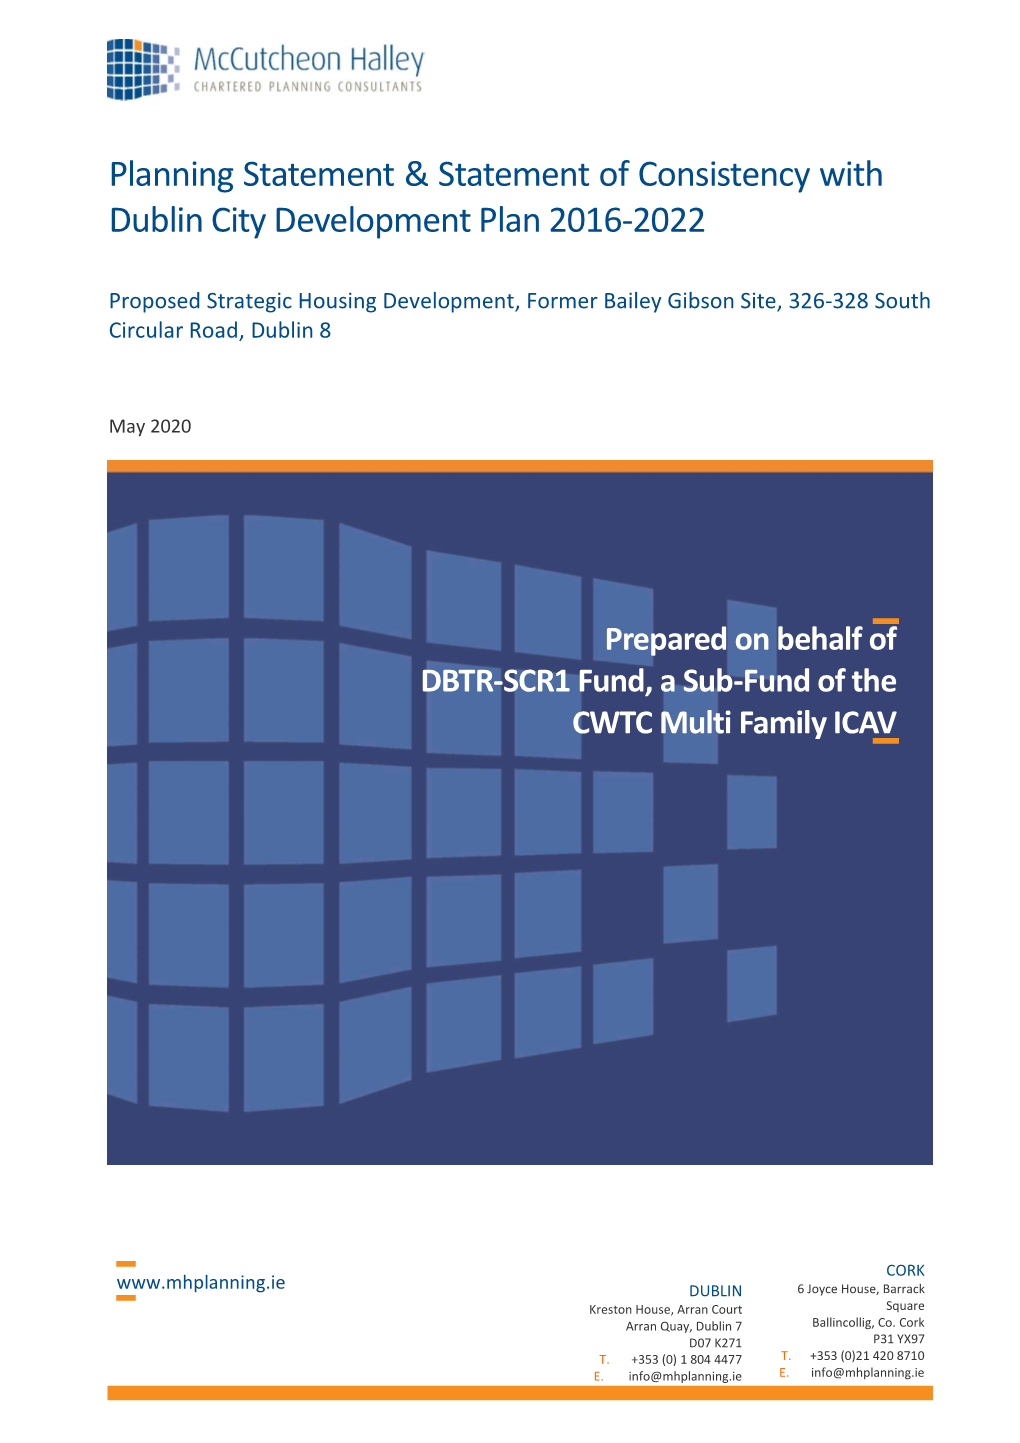 Planning Statement & Statement of Consistency with Dublin City